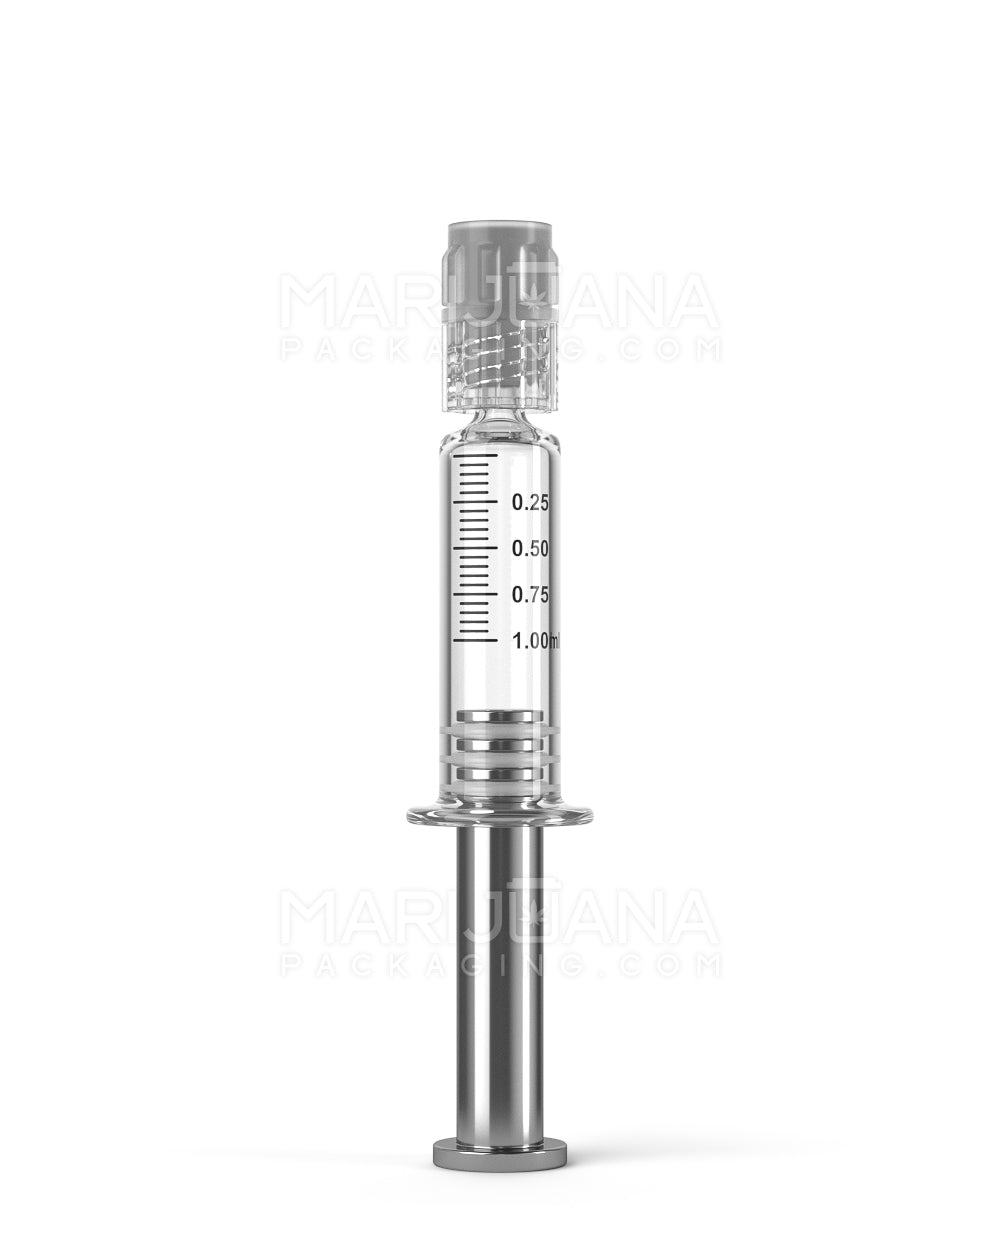 Luer Lock | Glass Dab Applicator Syringes w/ Metal Plunger | 1mL - 0.25mL Increments - 100 Count - 1